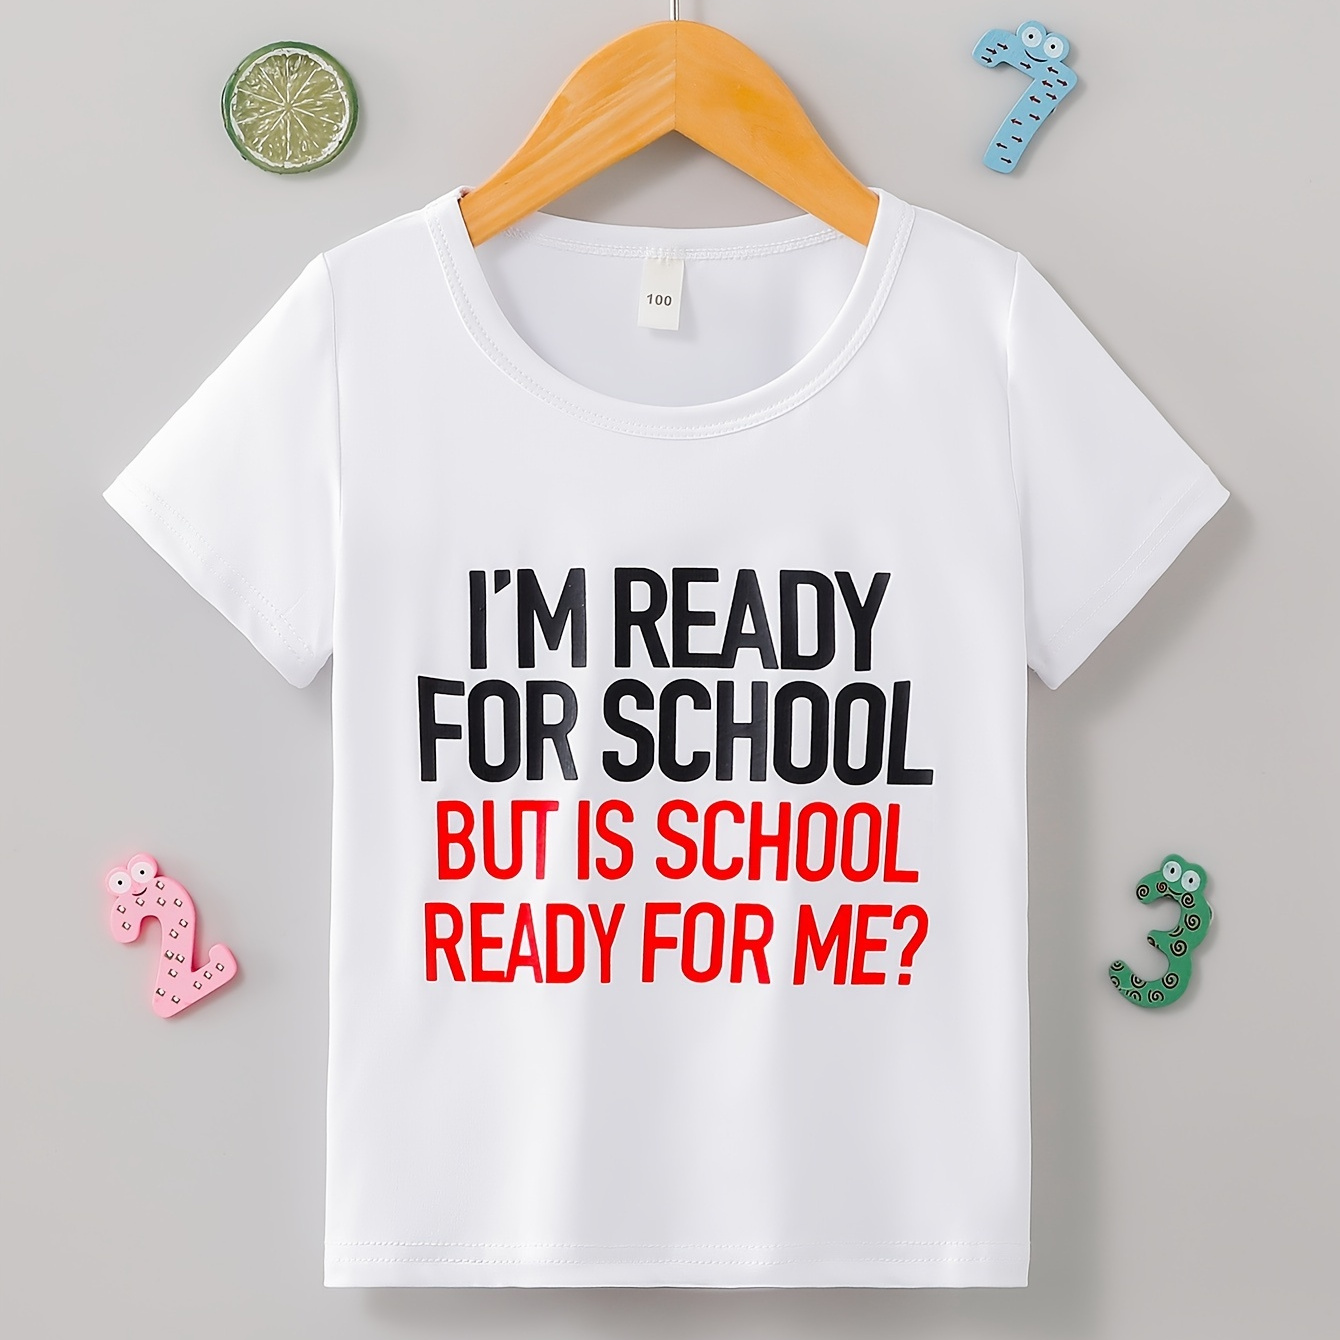 

Boys Funny T-shirt, Lightweight Comfy Short Sleeve Tops, "i‘m Ready For School" Graphic Tees For Unisex Toddlers Summer, Kids Clothings